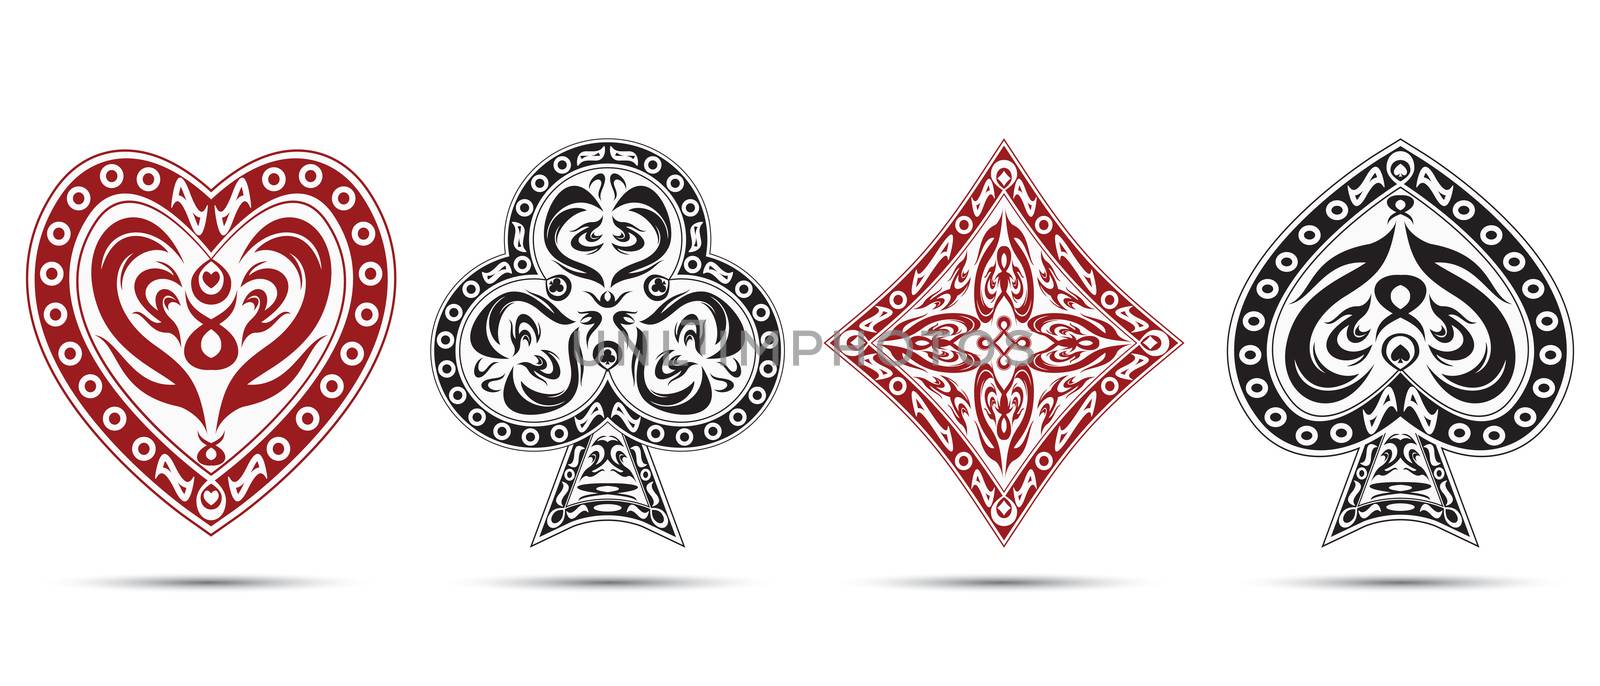 spades, hearts, diamonds, clubs poker cards symbols isolated on white background by Lemon_workshop